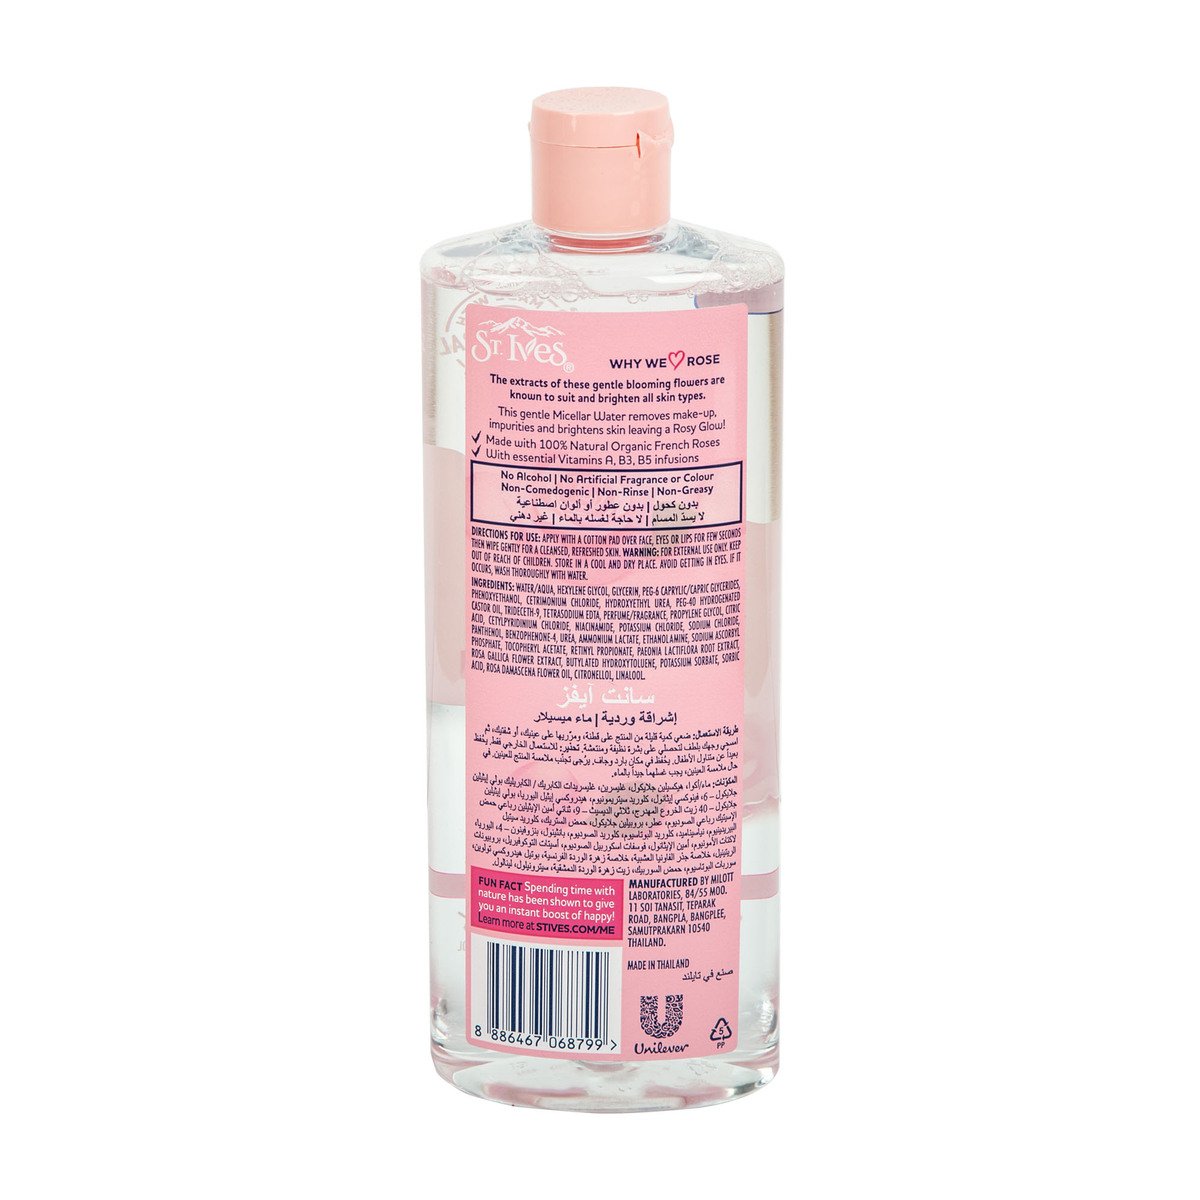 St. Ives Rosy Glow Rose Micellar Water 400 ml